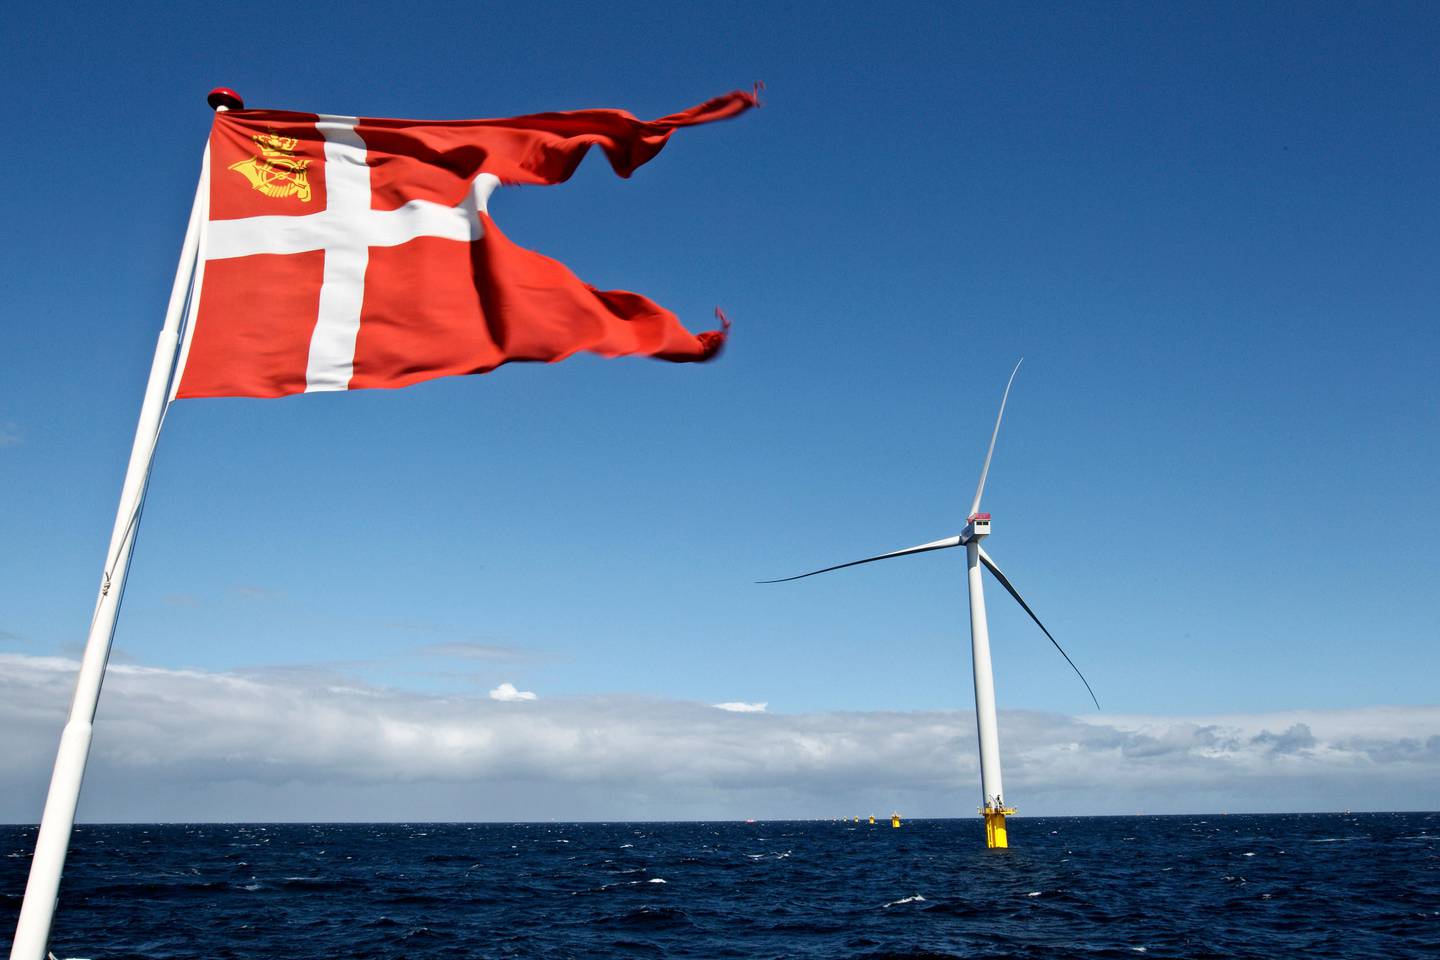 The first mill of Danish Energy Company's (DONG Energy) new Offshore Wind Farm was  presented to the press near the island of Anholt, in the Kattegat Sea, Denmark, between Jutland and Sweden Wednesday Sept. 5. 2012. The company will raise a total of 111 wind turbines, each with a height of 120 meters, within the next year to be completed in 2013. The Wind Farm will get a capacity of 400 MW. (AP Photo / Polfoto /Jens Dresling) DENMARK OUT